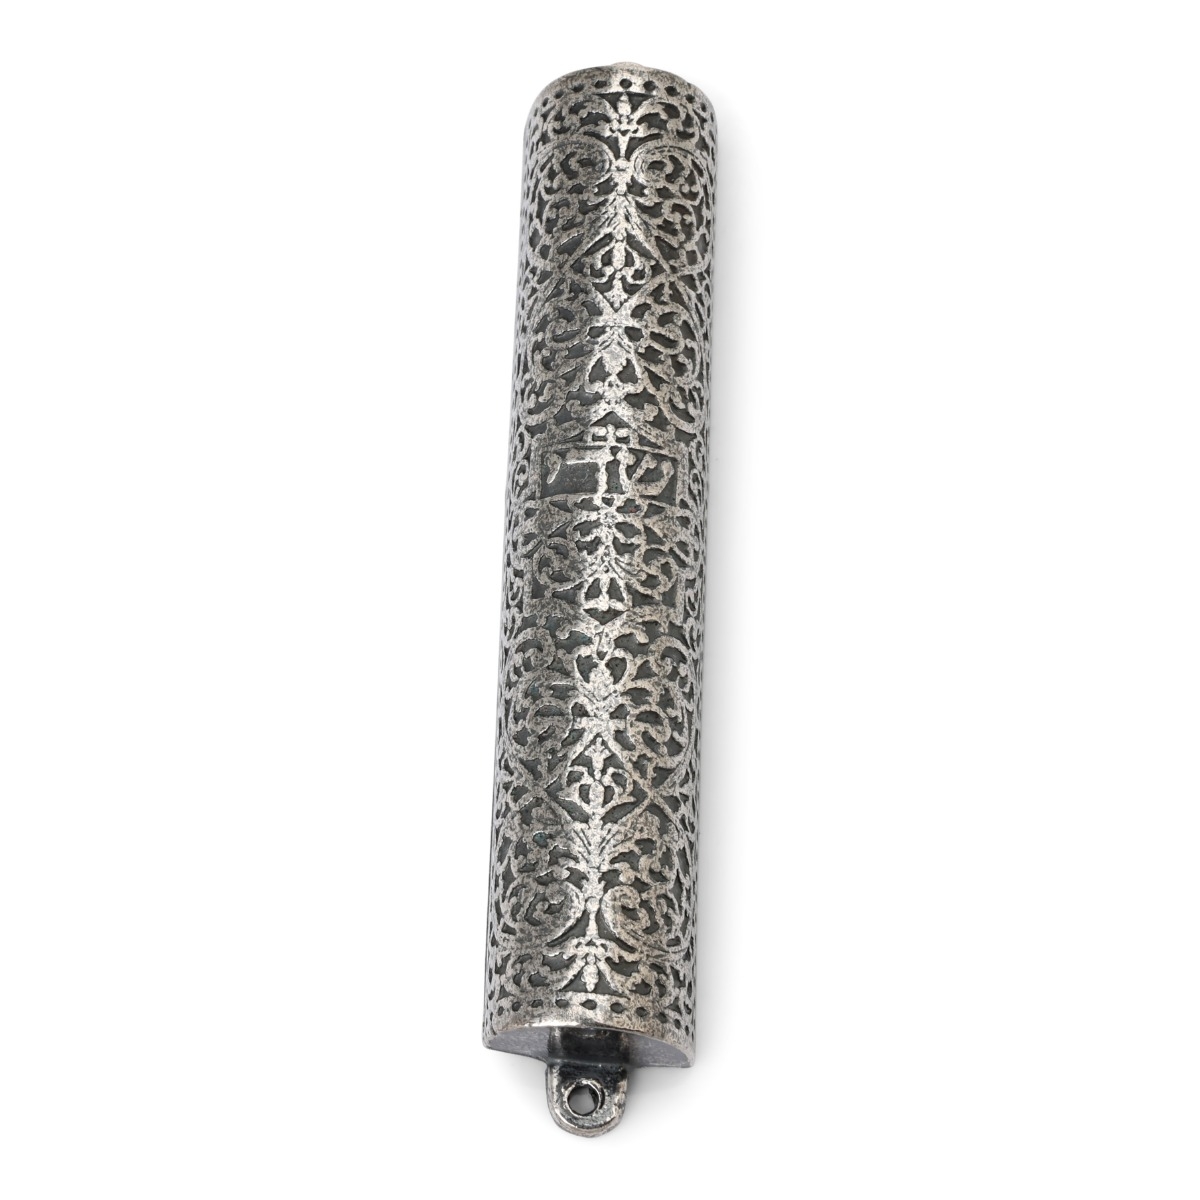 Pewter Mezuzah Case. Adaptation of Silver Bible Binding. Germany, 17th Century - 1